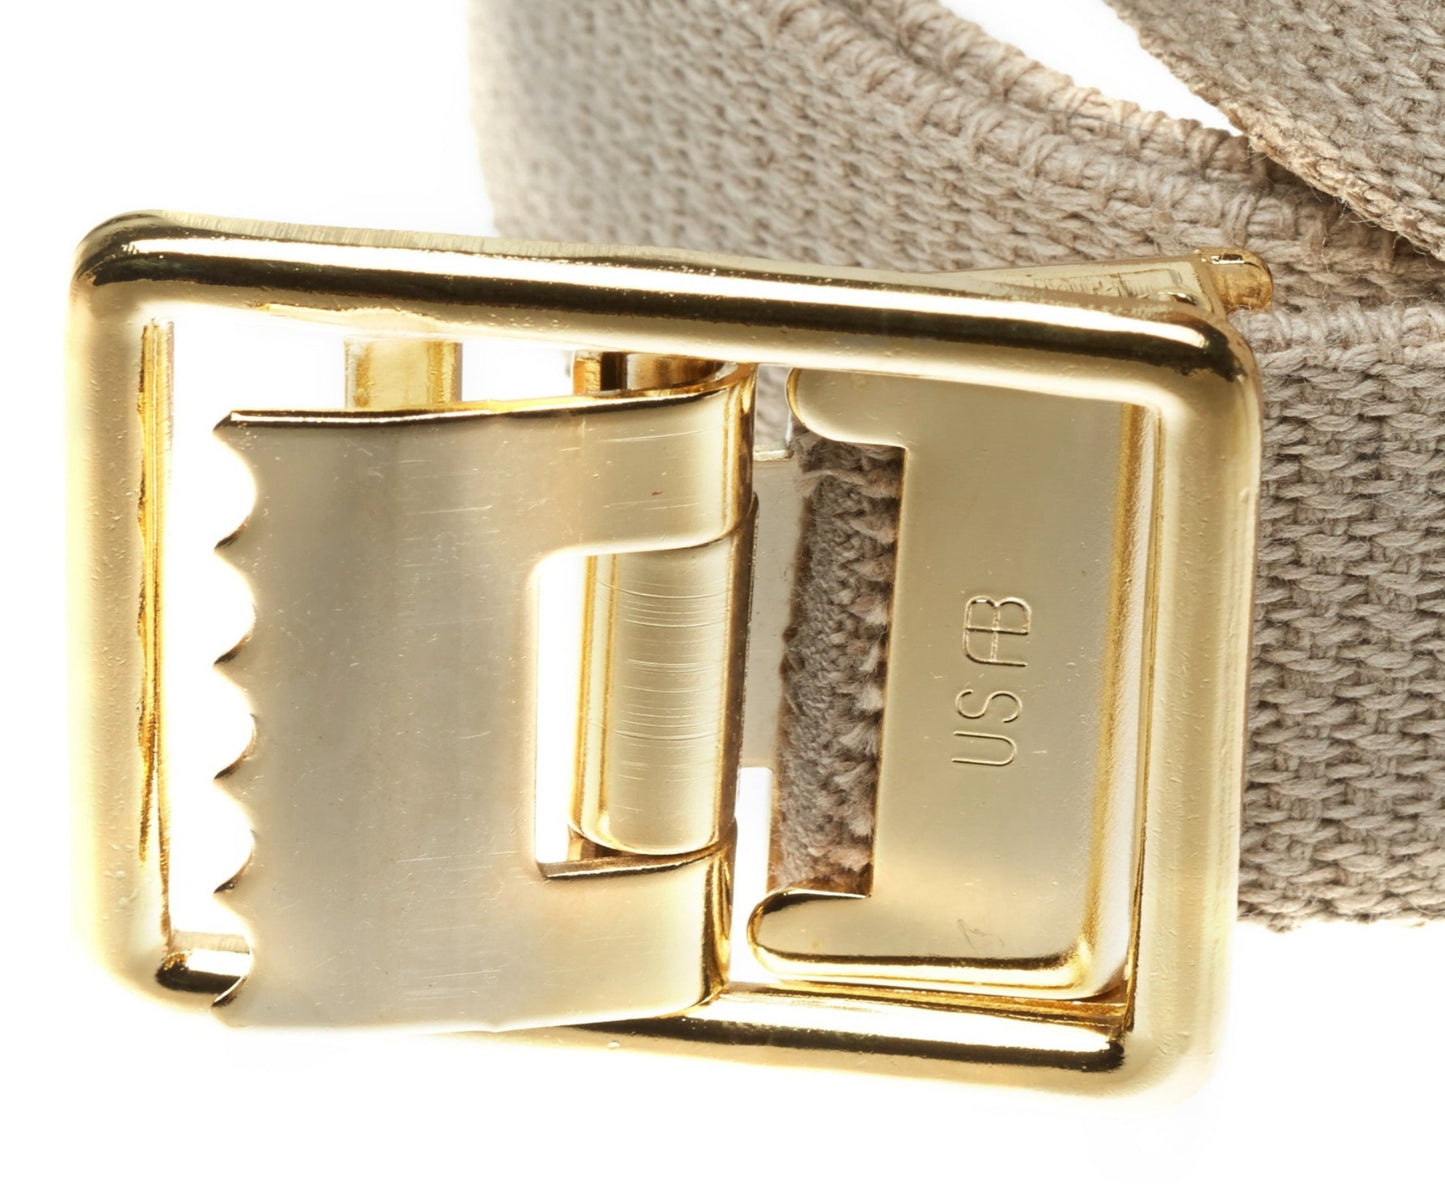 Marine Corps. Web Belt with Open Face Solid Brass Buckle and Tip- 4 Colors!